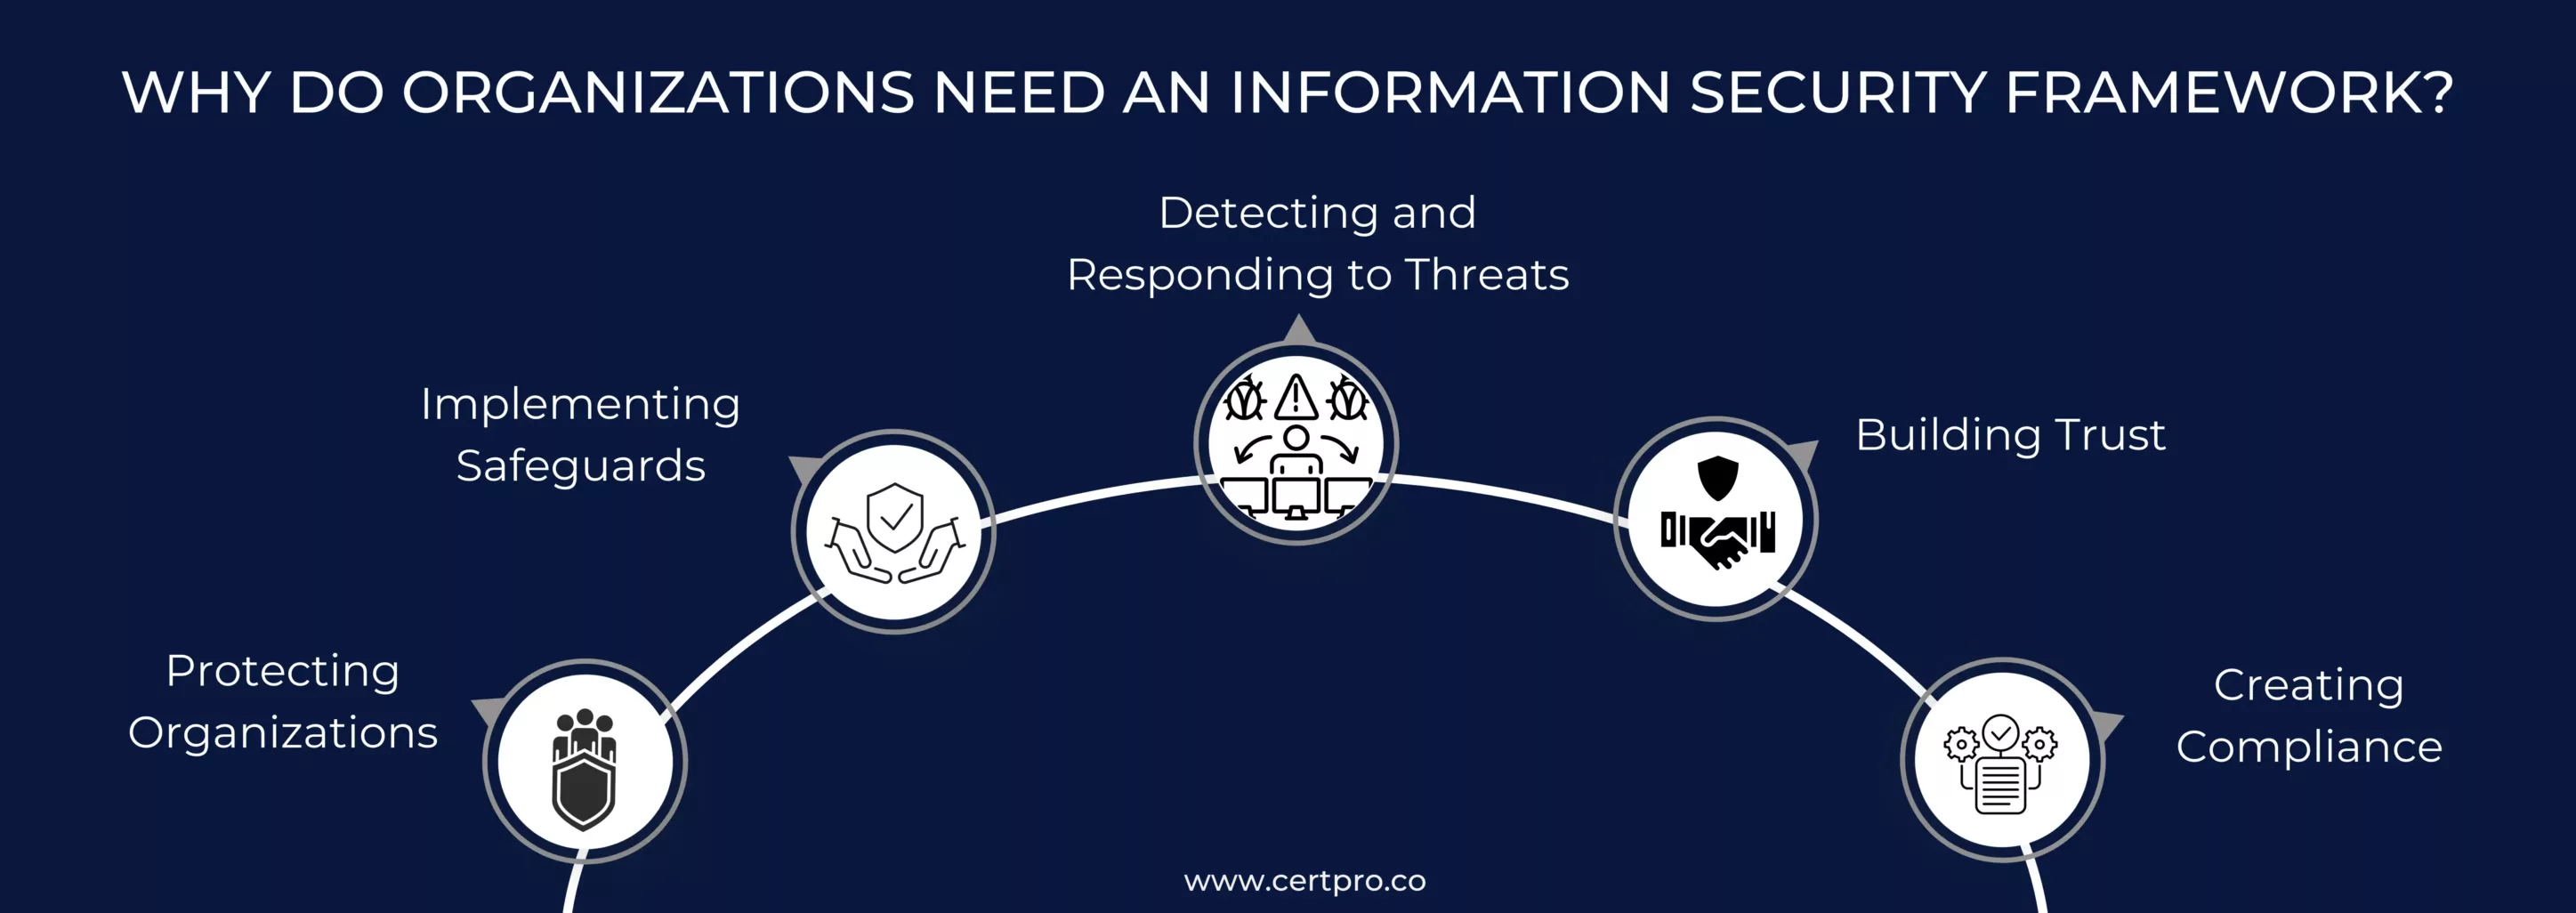 WHY DO ORGANIZATIONS NEED AN INFORMATION SECURITY FRAMEWORK